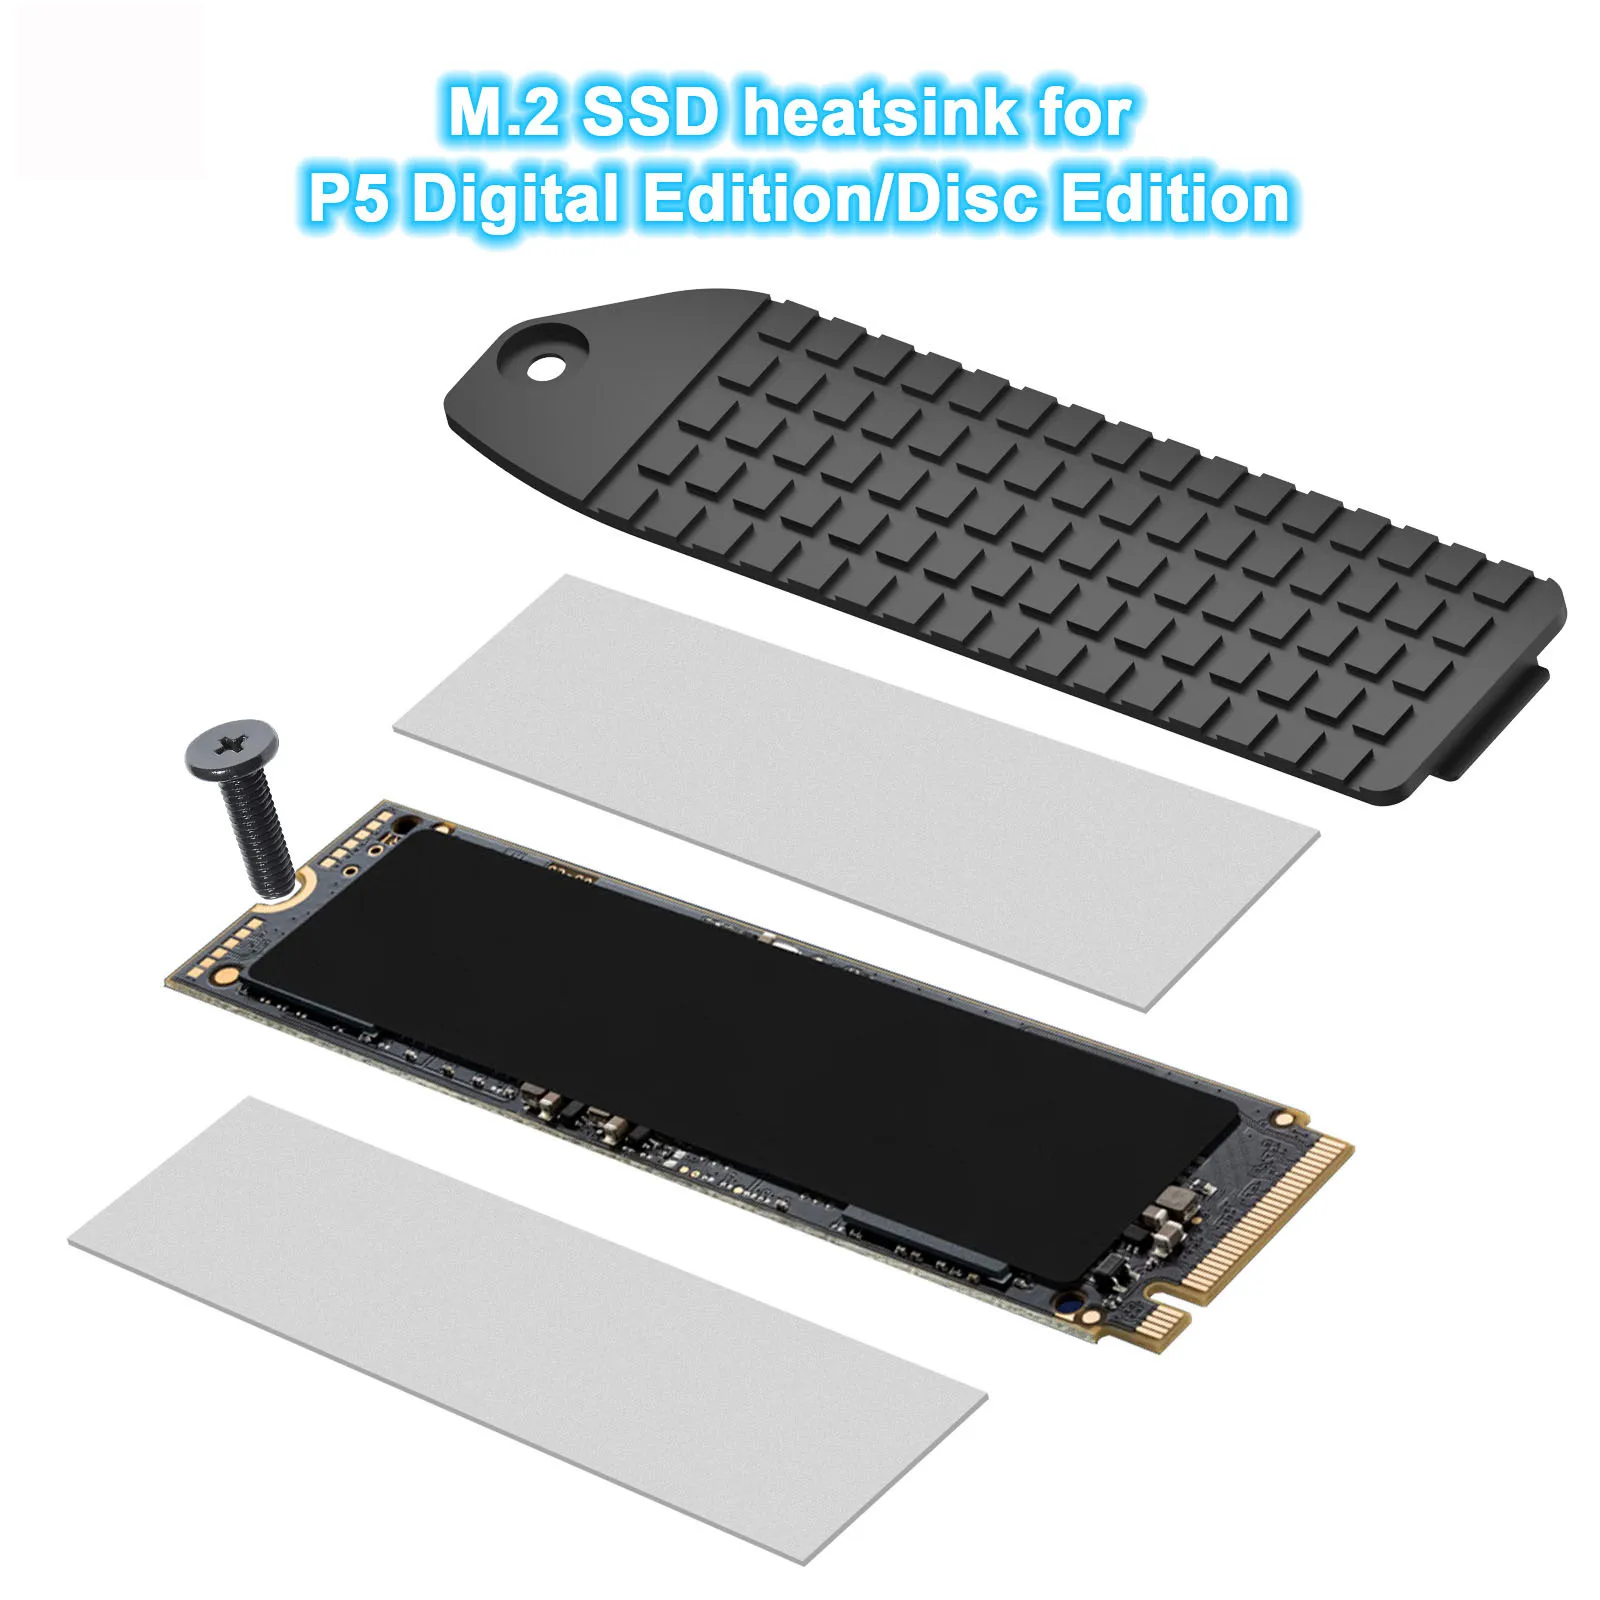 Hot sale M.2 SSD Heat sinks for PS5 Digital Edition/Disc Edition Radiator with Thermal Conductive pad